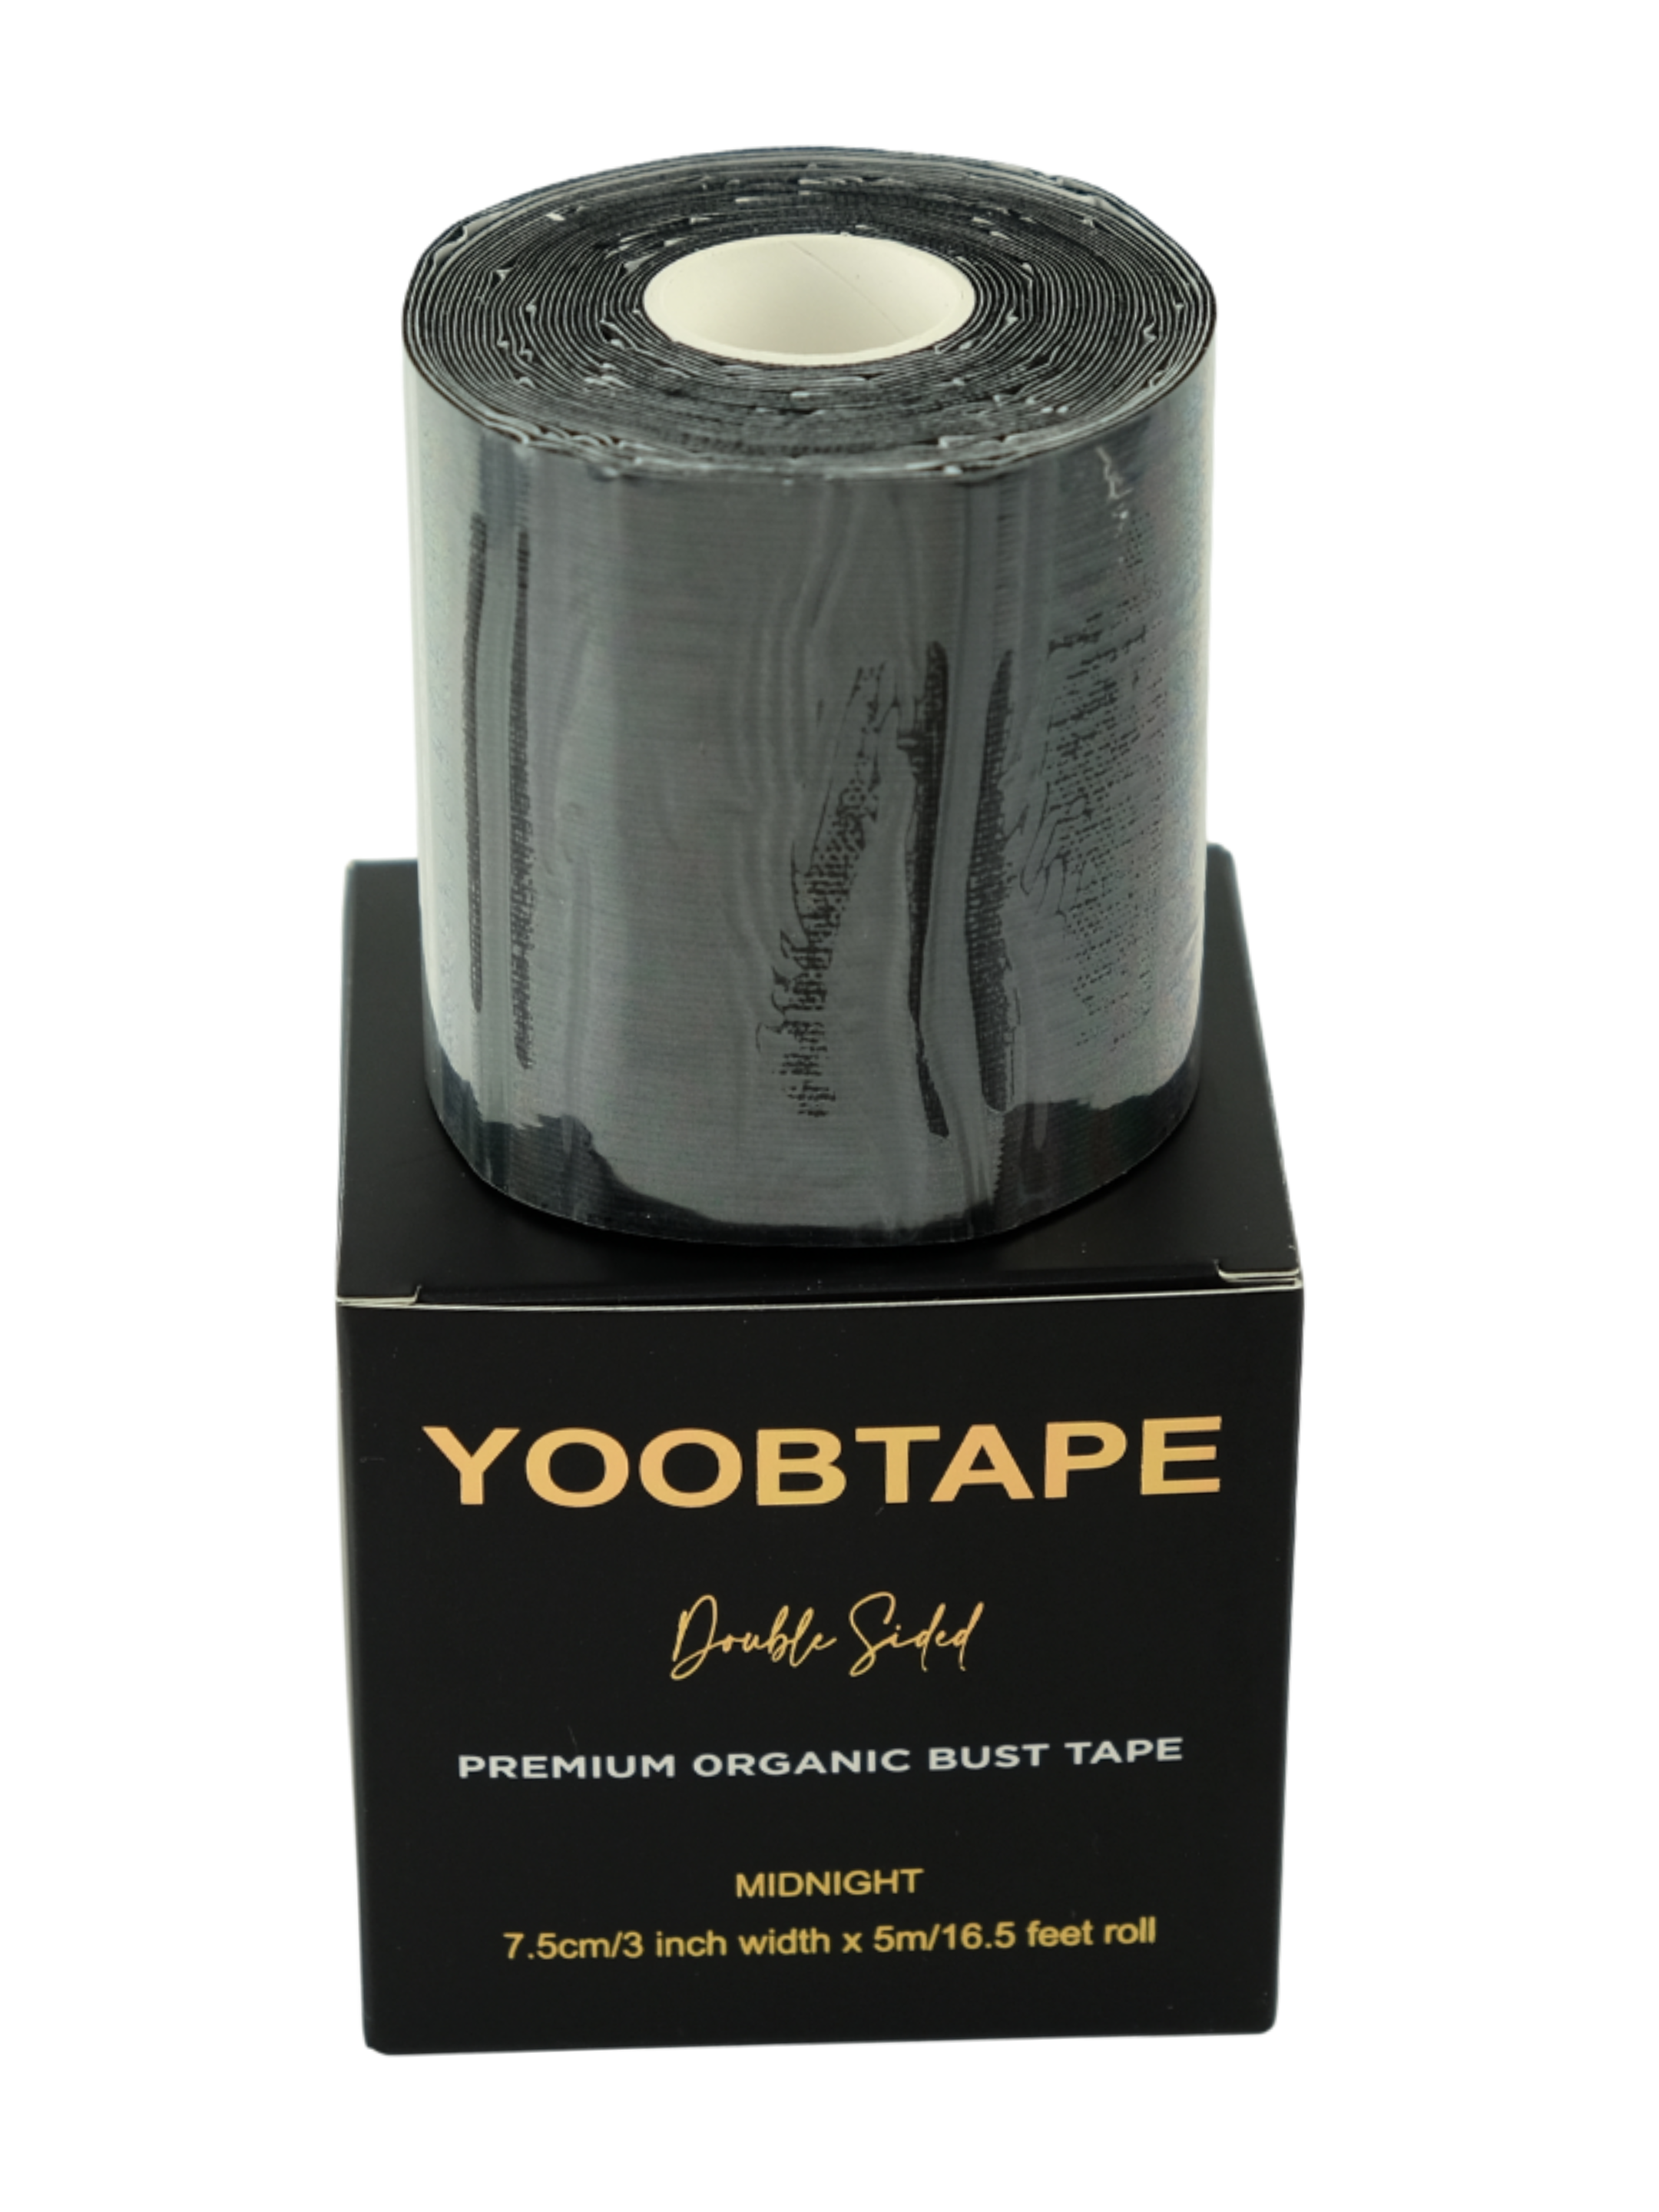 YOOBTAPE Premium Double Sided Bust Tape - Midnight